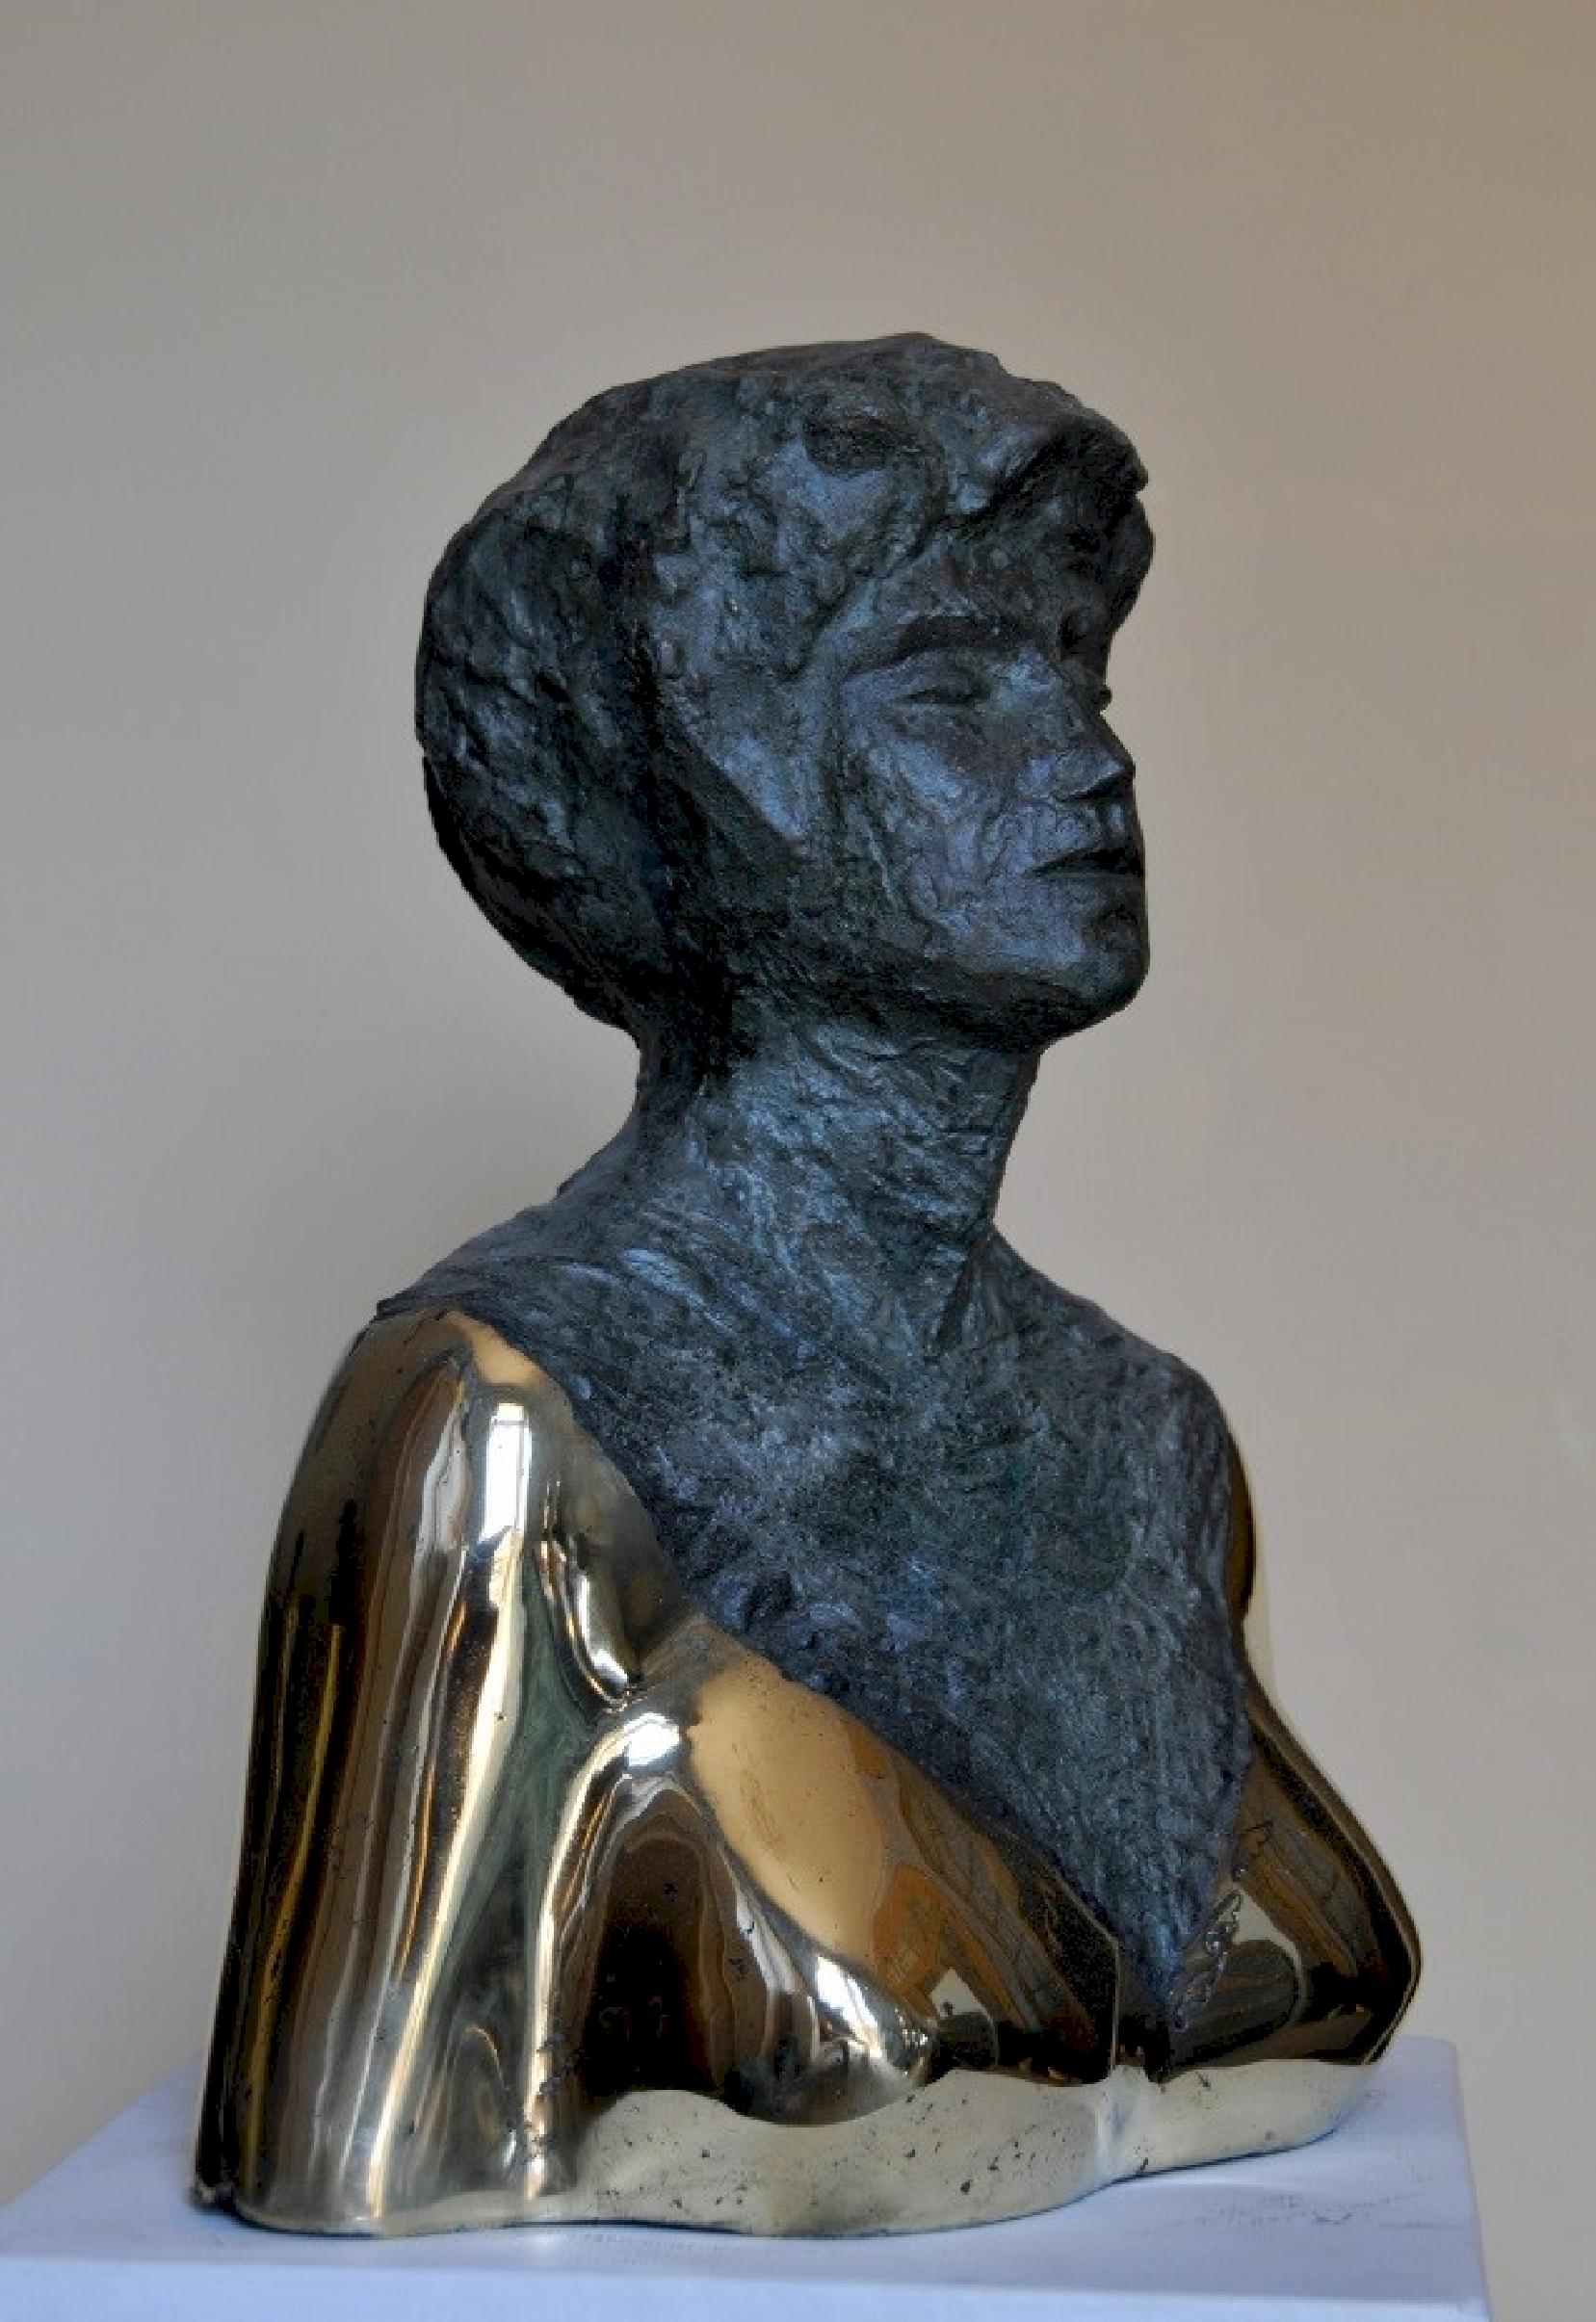 "Peggy" Bronze Sculpture 18" x 15" x 8" inch by Sarkis Tossonian

Sarkis Tossoonian was born in Alexandria in 1953. He graduated from the Faculty of Fine Arts/Sculpture in 1979. He started exhibiting in individual and group exhibitions in Alexandria